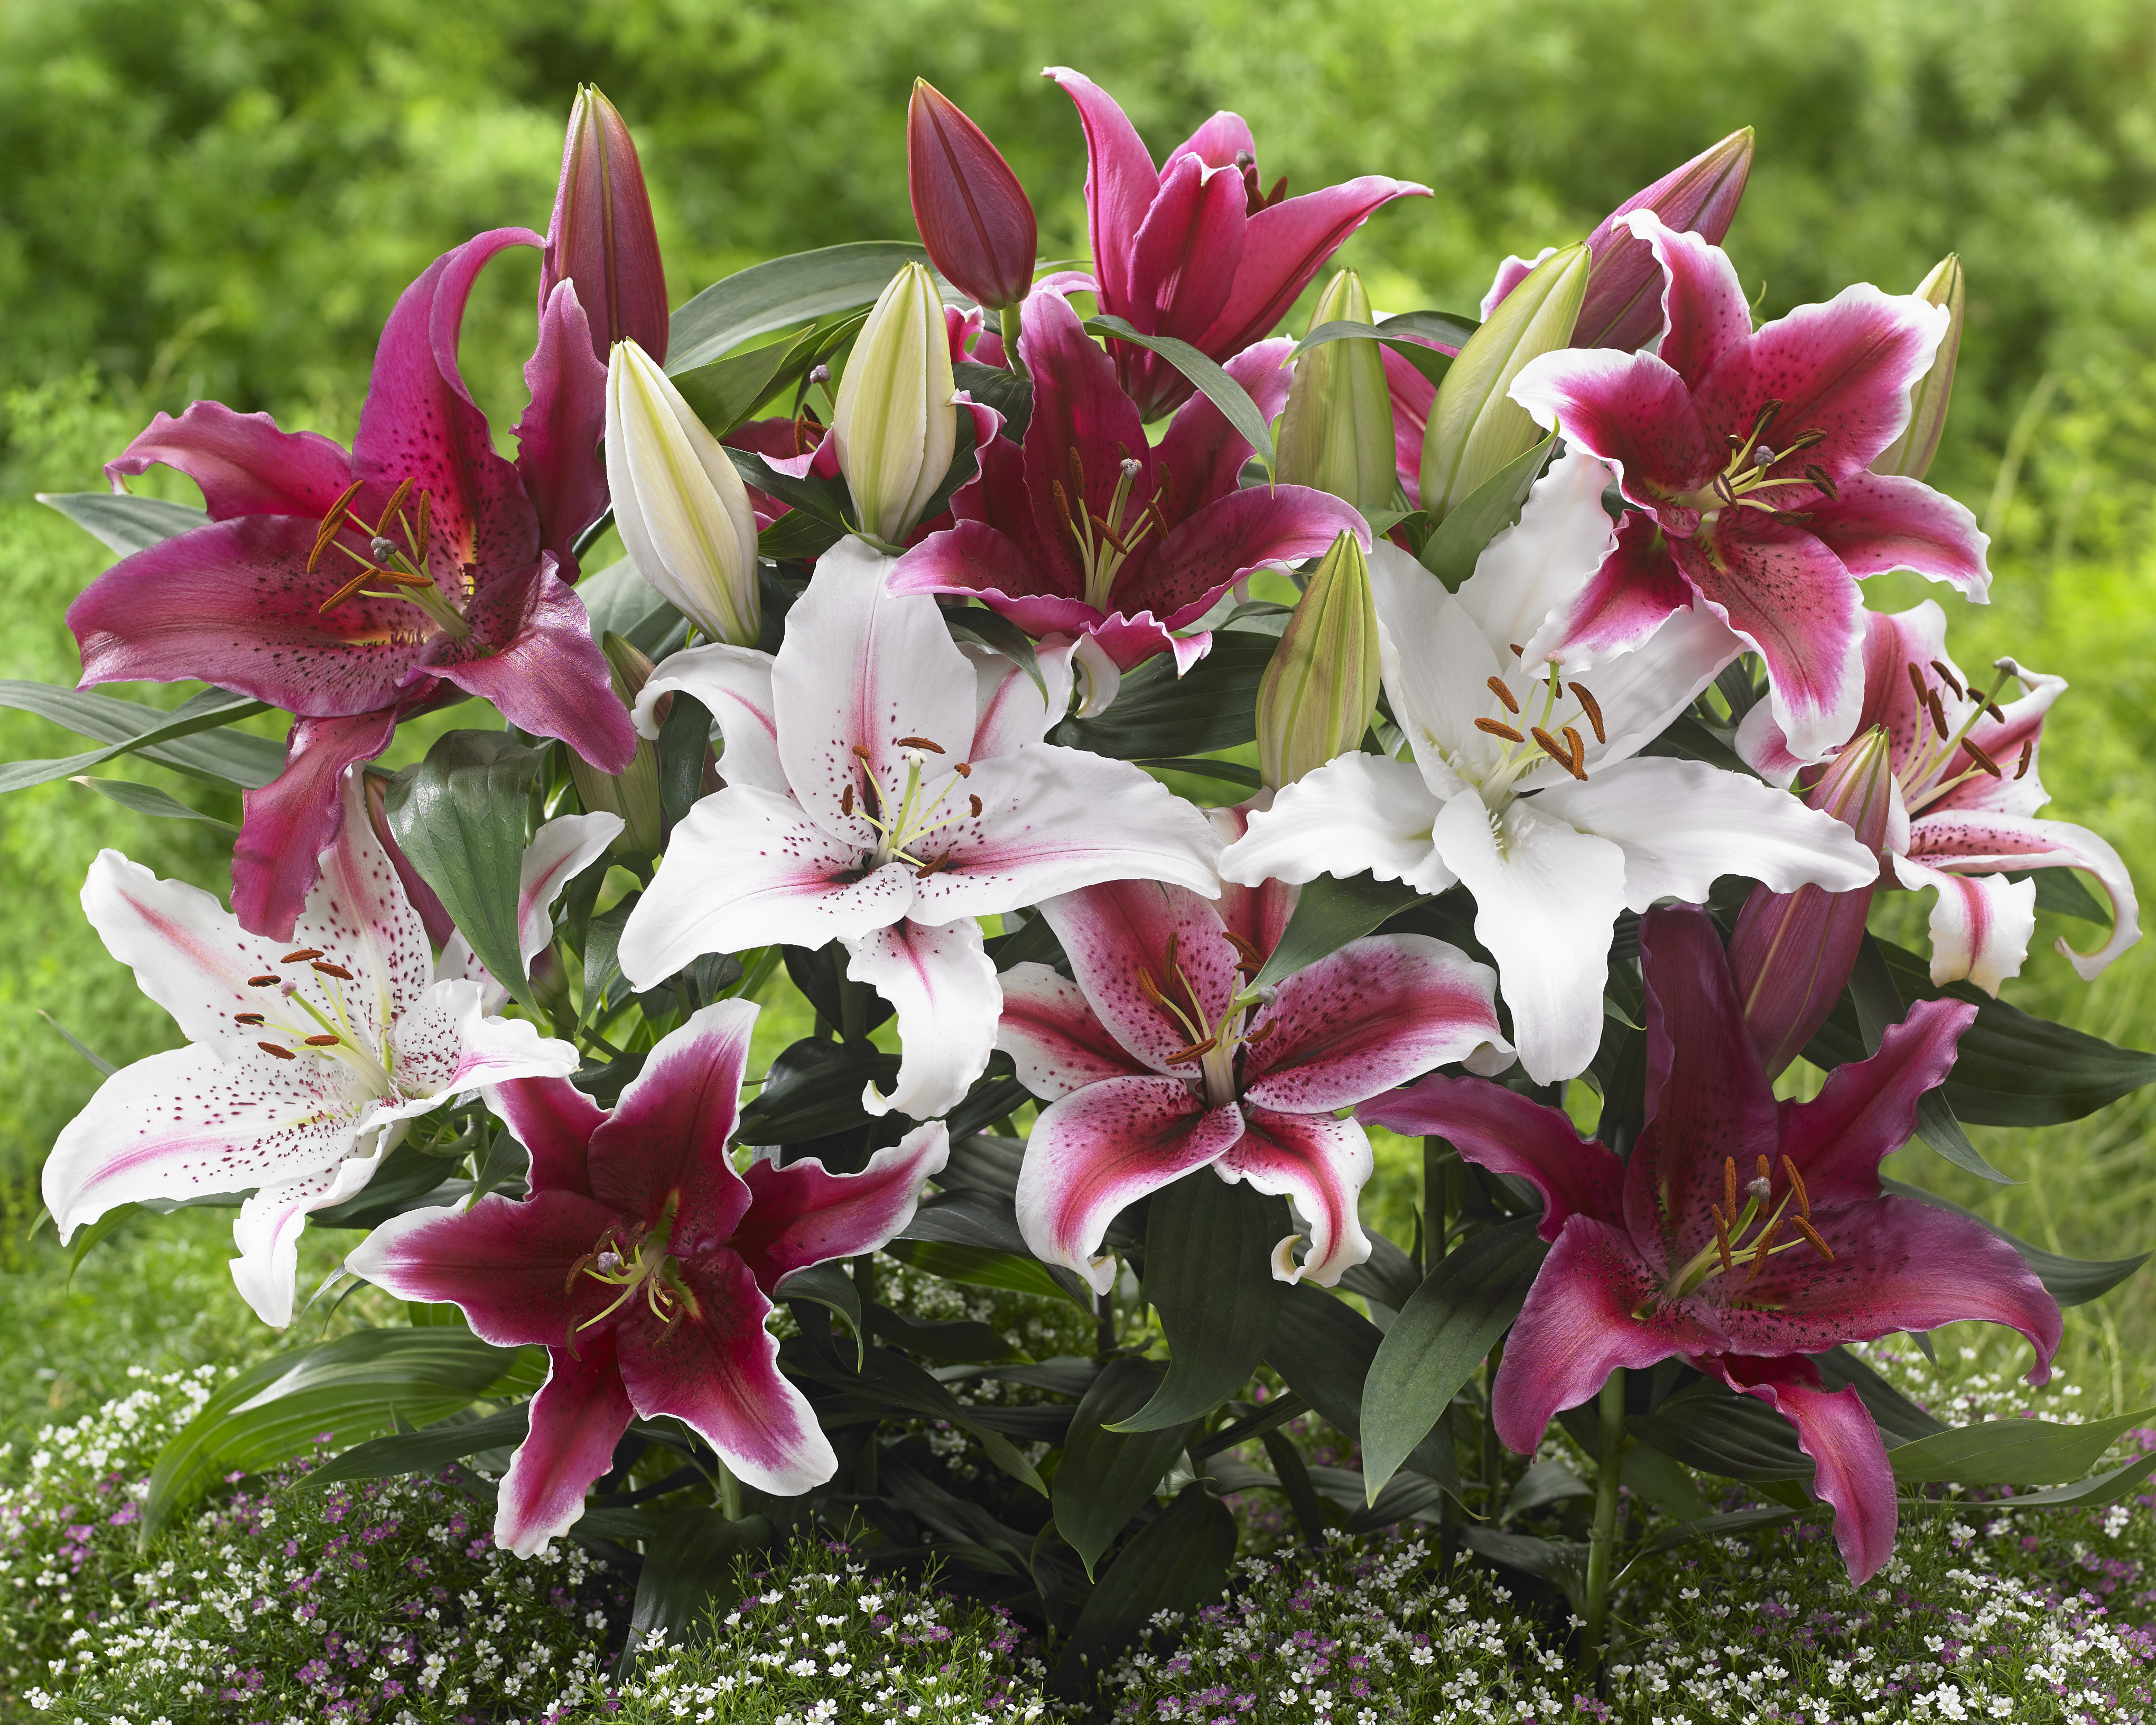 Candy Cane' Lily Bulb Collection from the award winning Harts Nursery